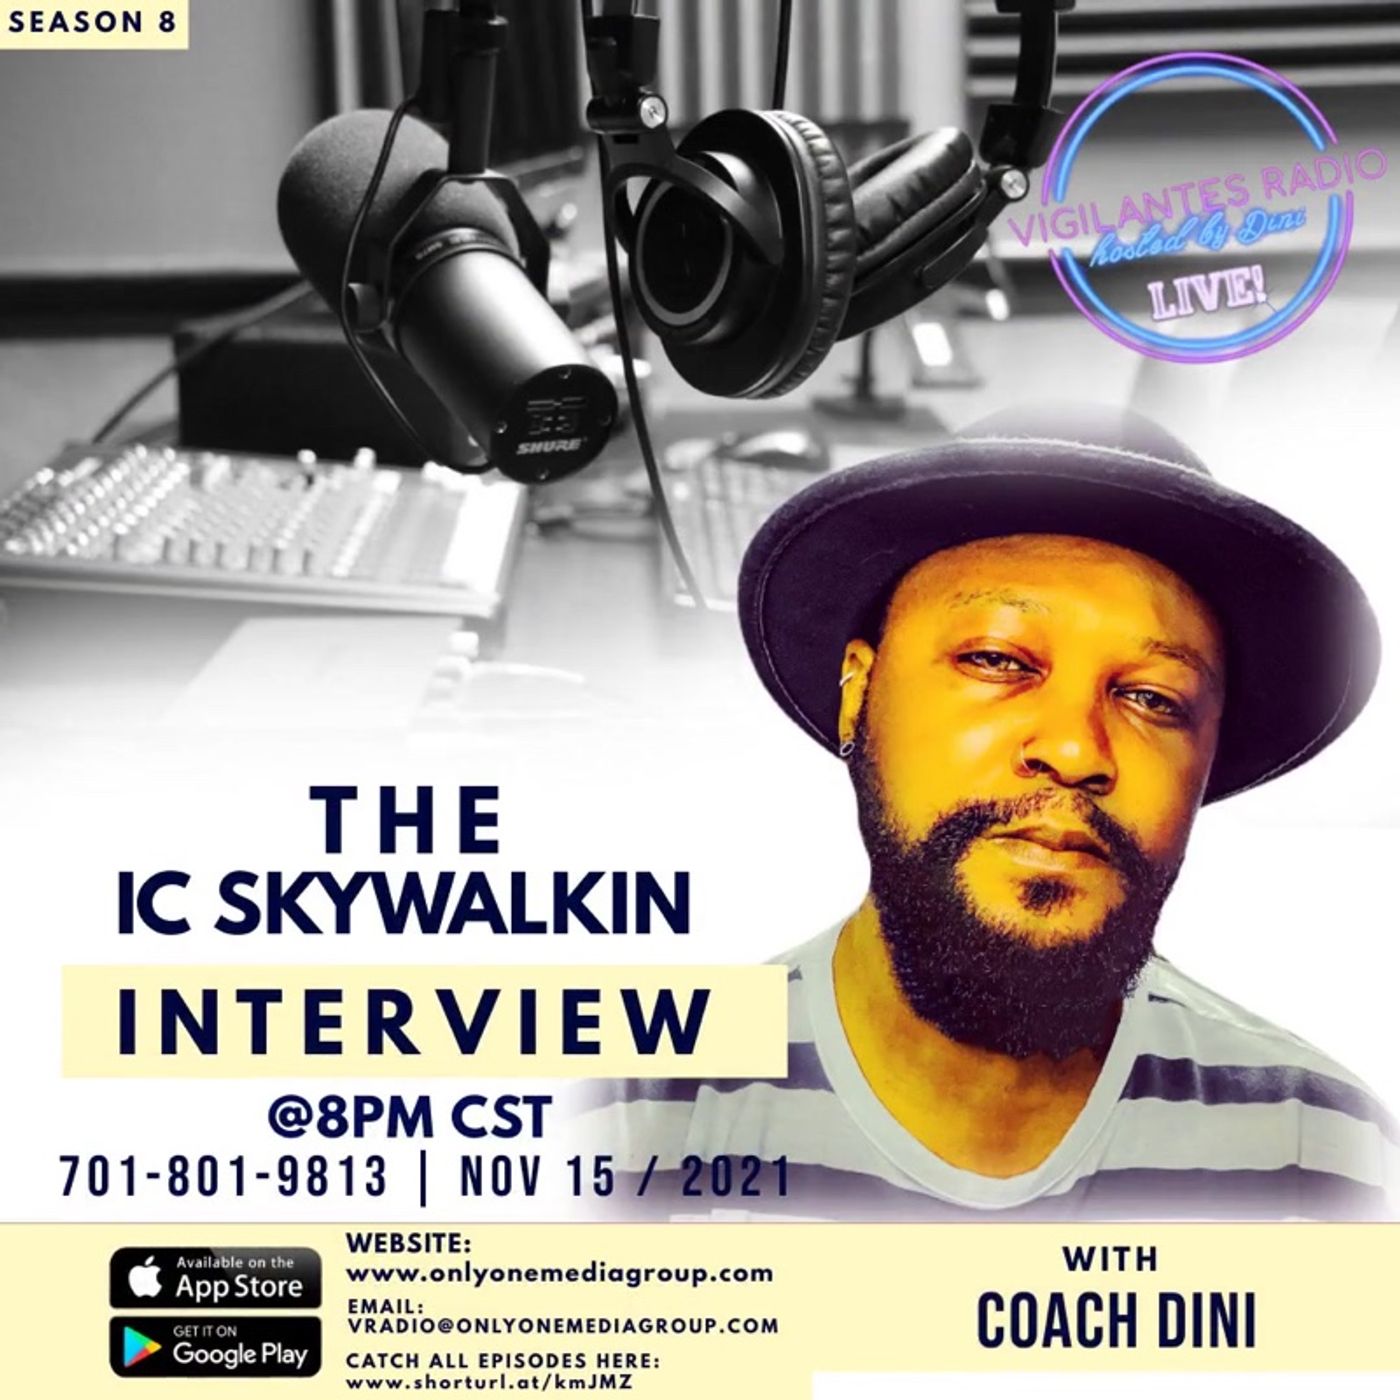 The IC Skywalkin Interview. Image